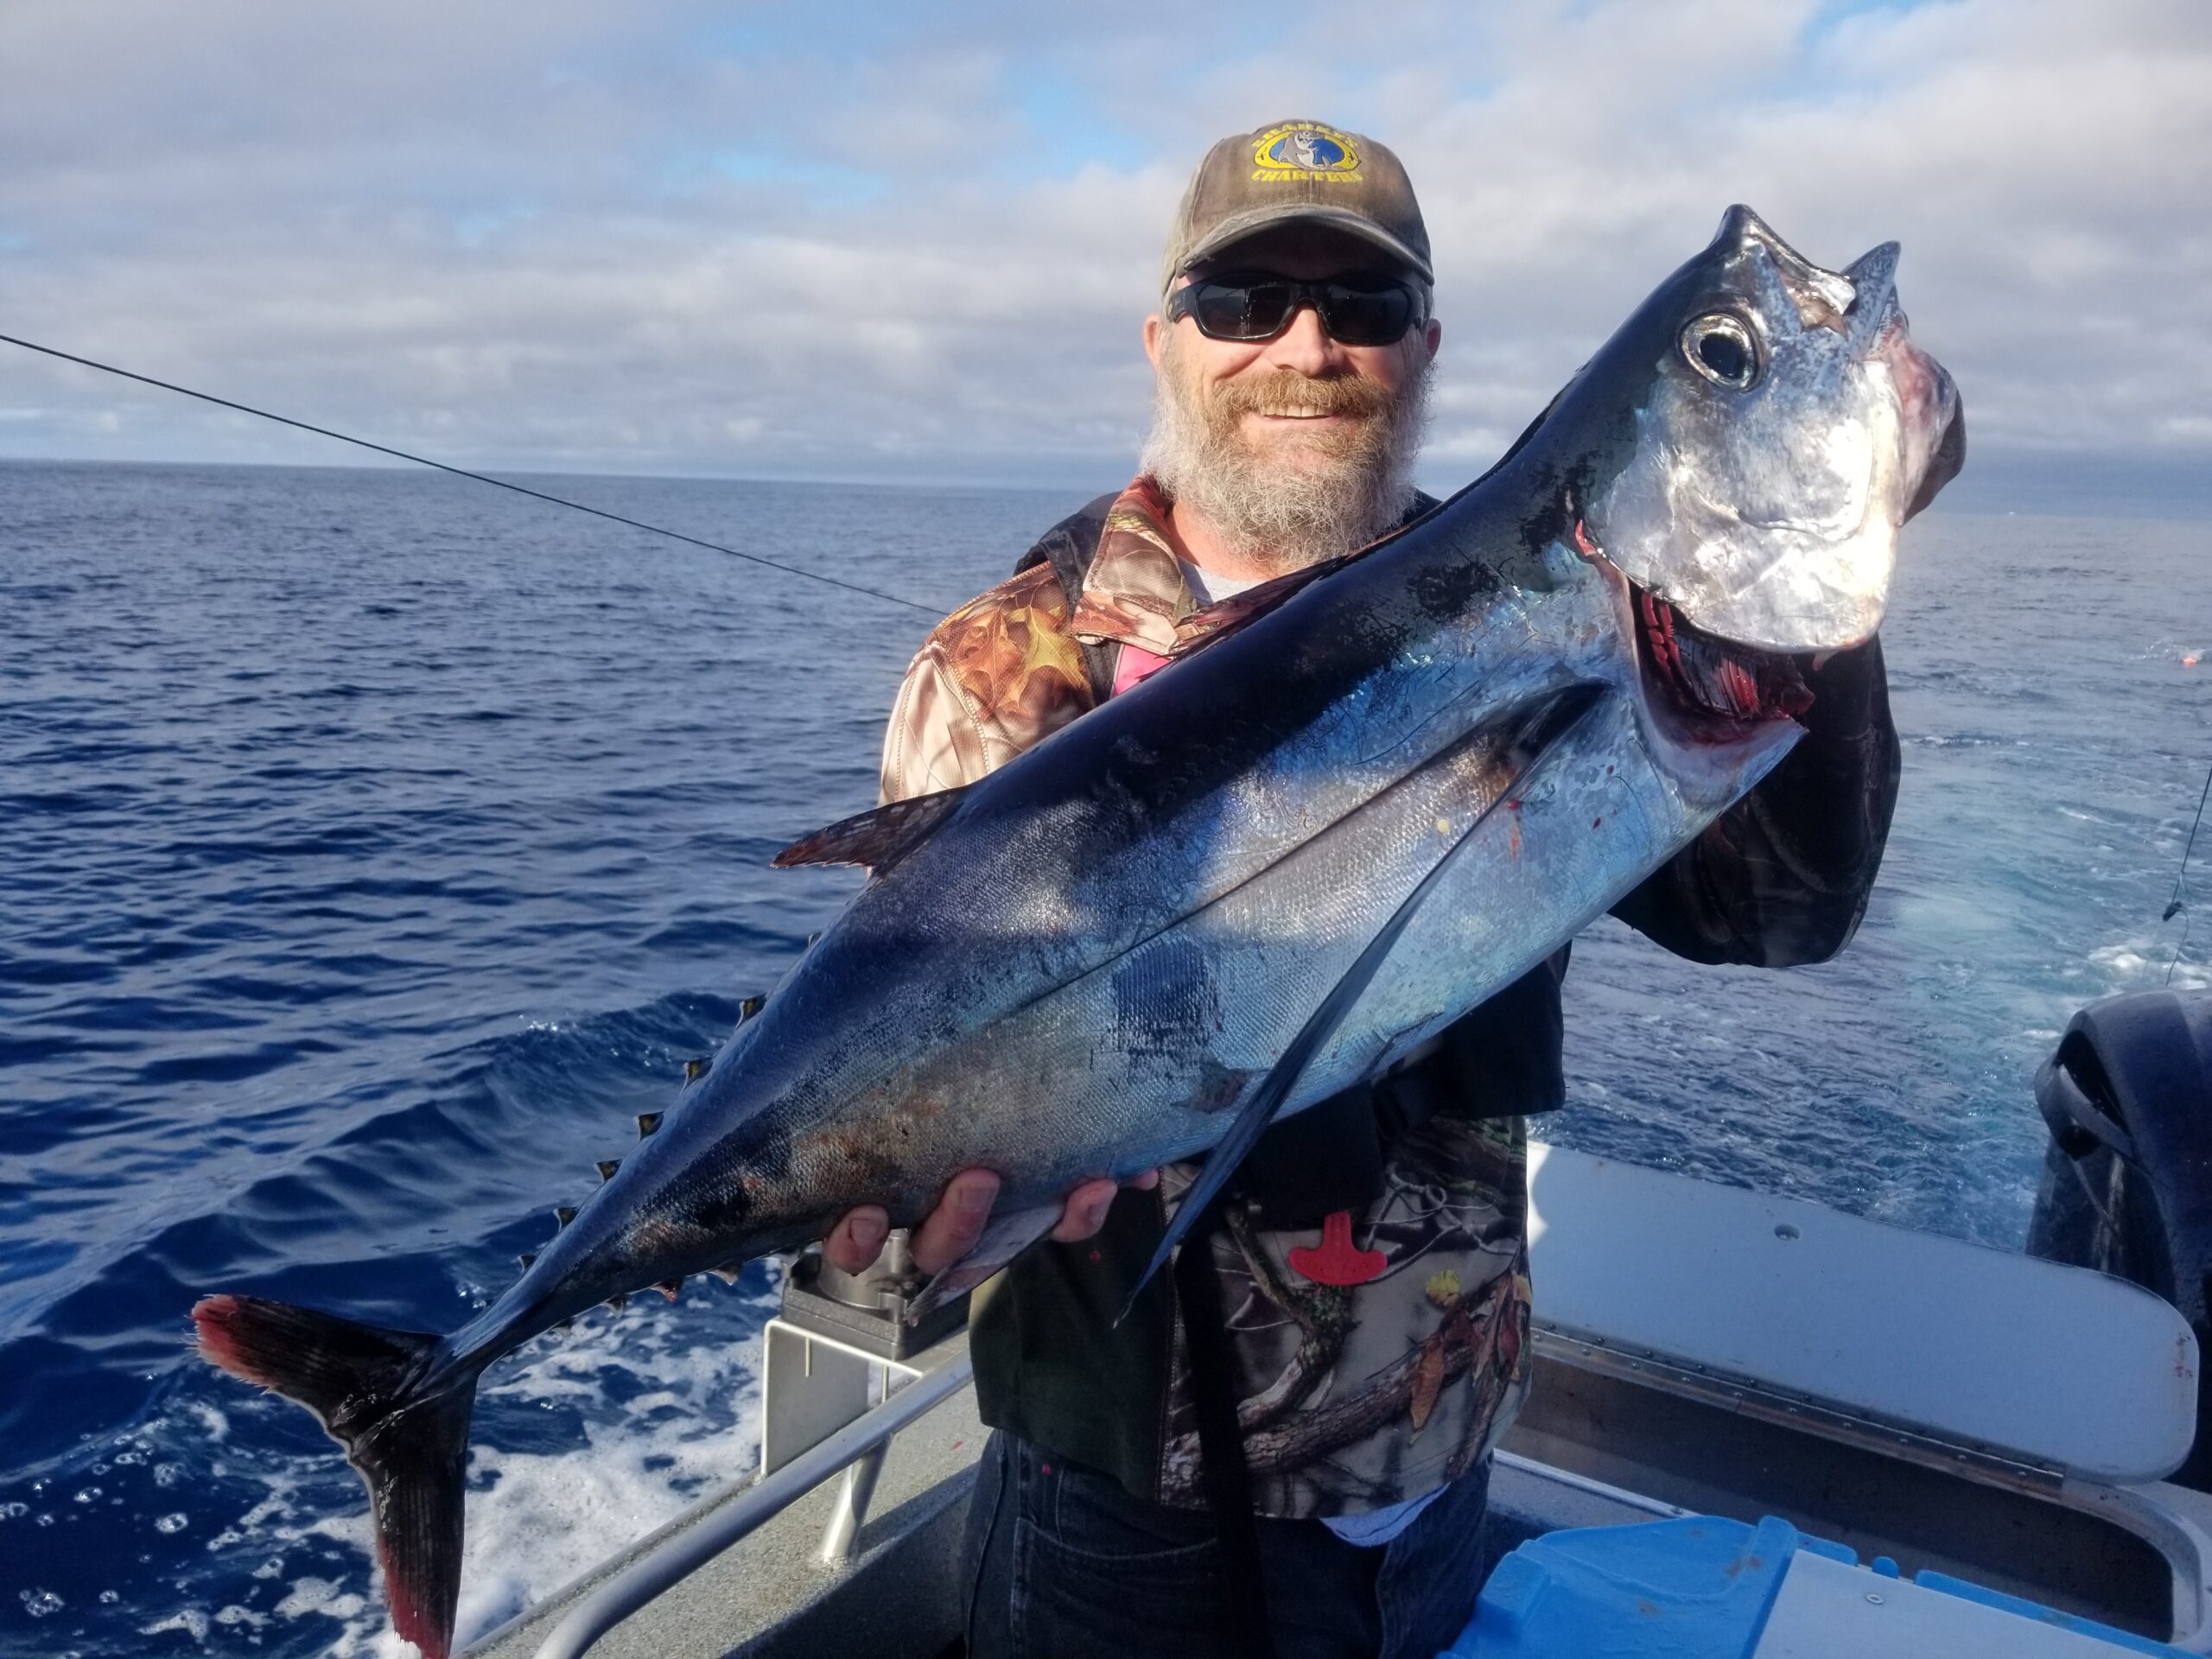 Product Review: Safe Catch Tuna Fish, Stay Adventurous